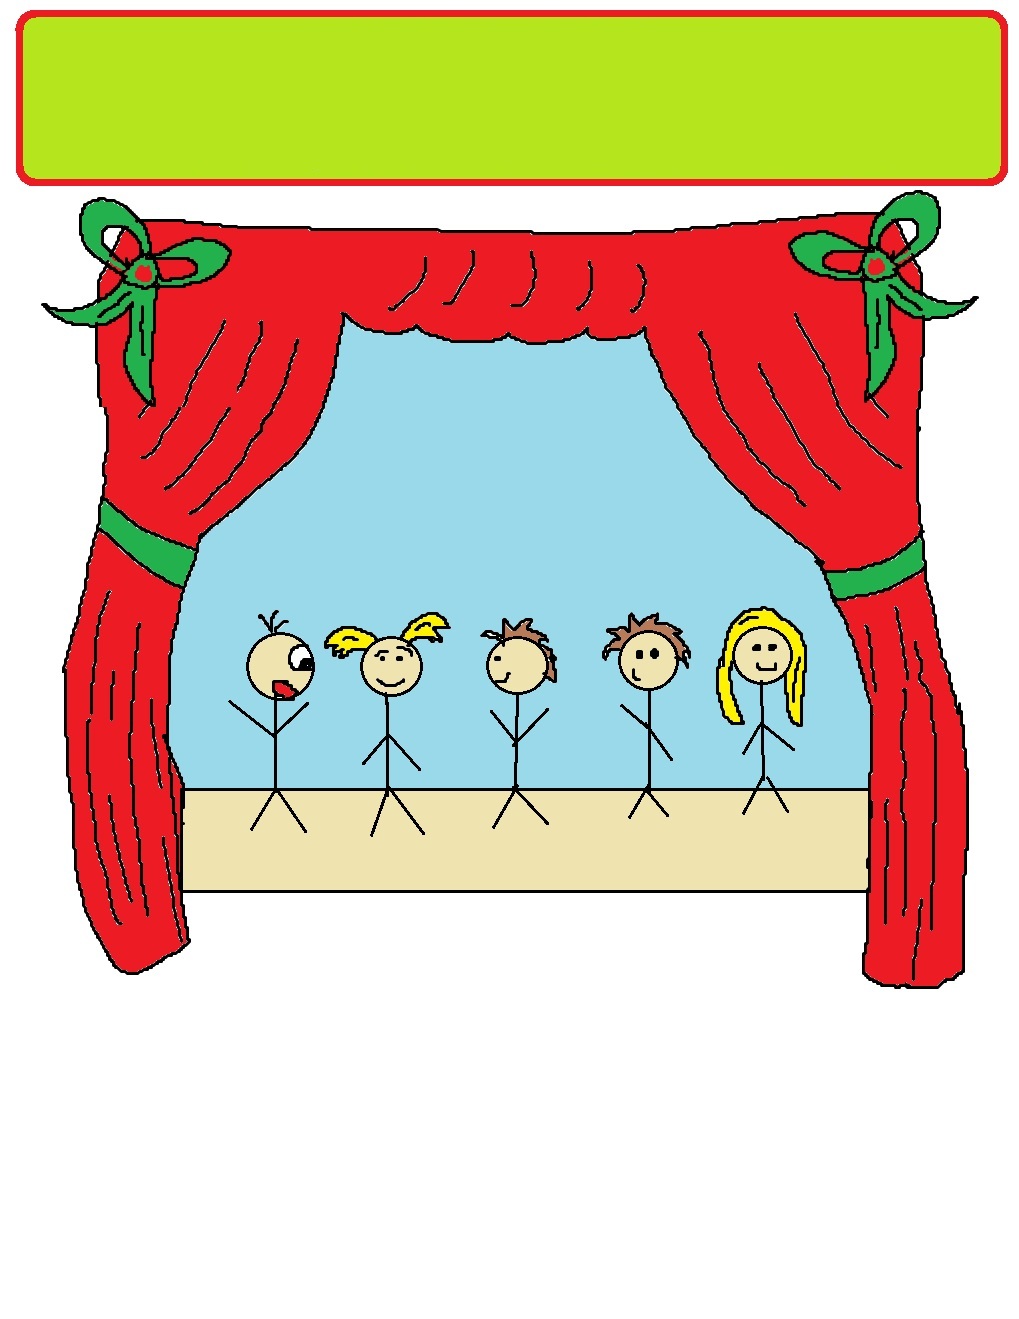 School play cliparts free download clip art on jpg 3